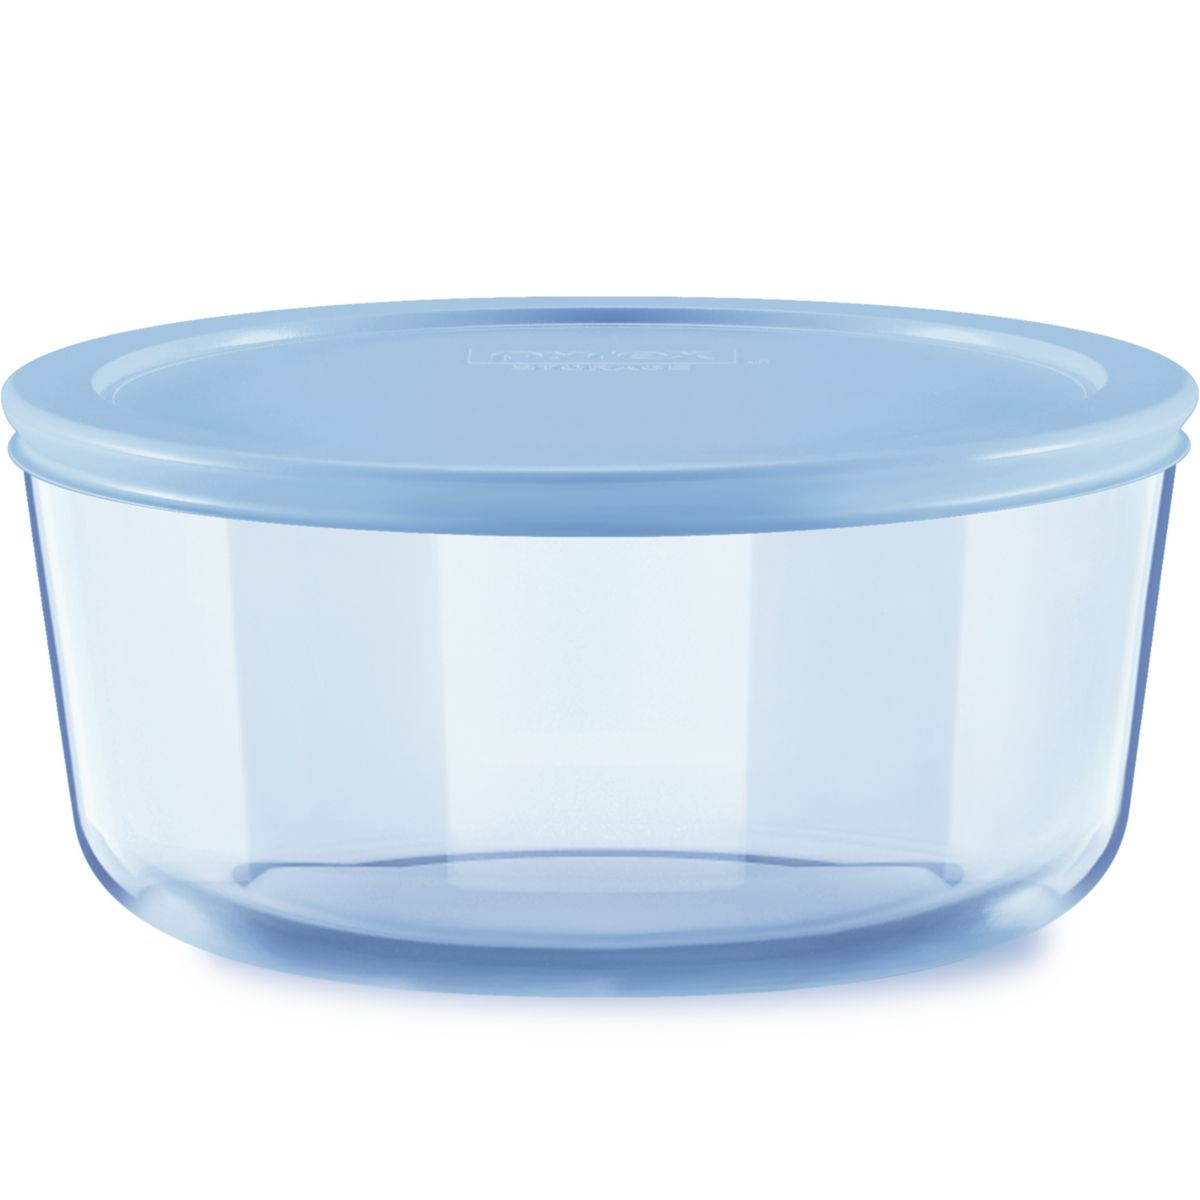 Pyrex Simply Store Blue Tinted 7-cup Round Food Storage Container with Plastic Lid Pyrex